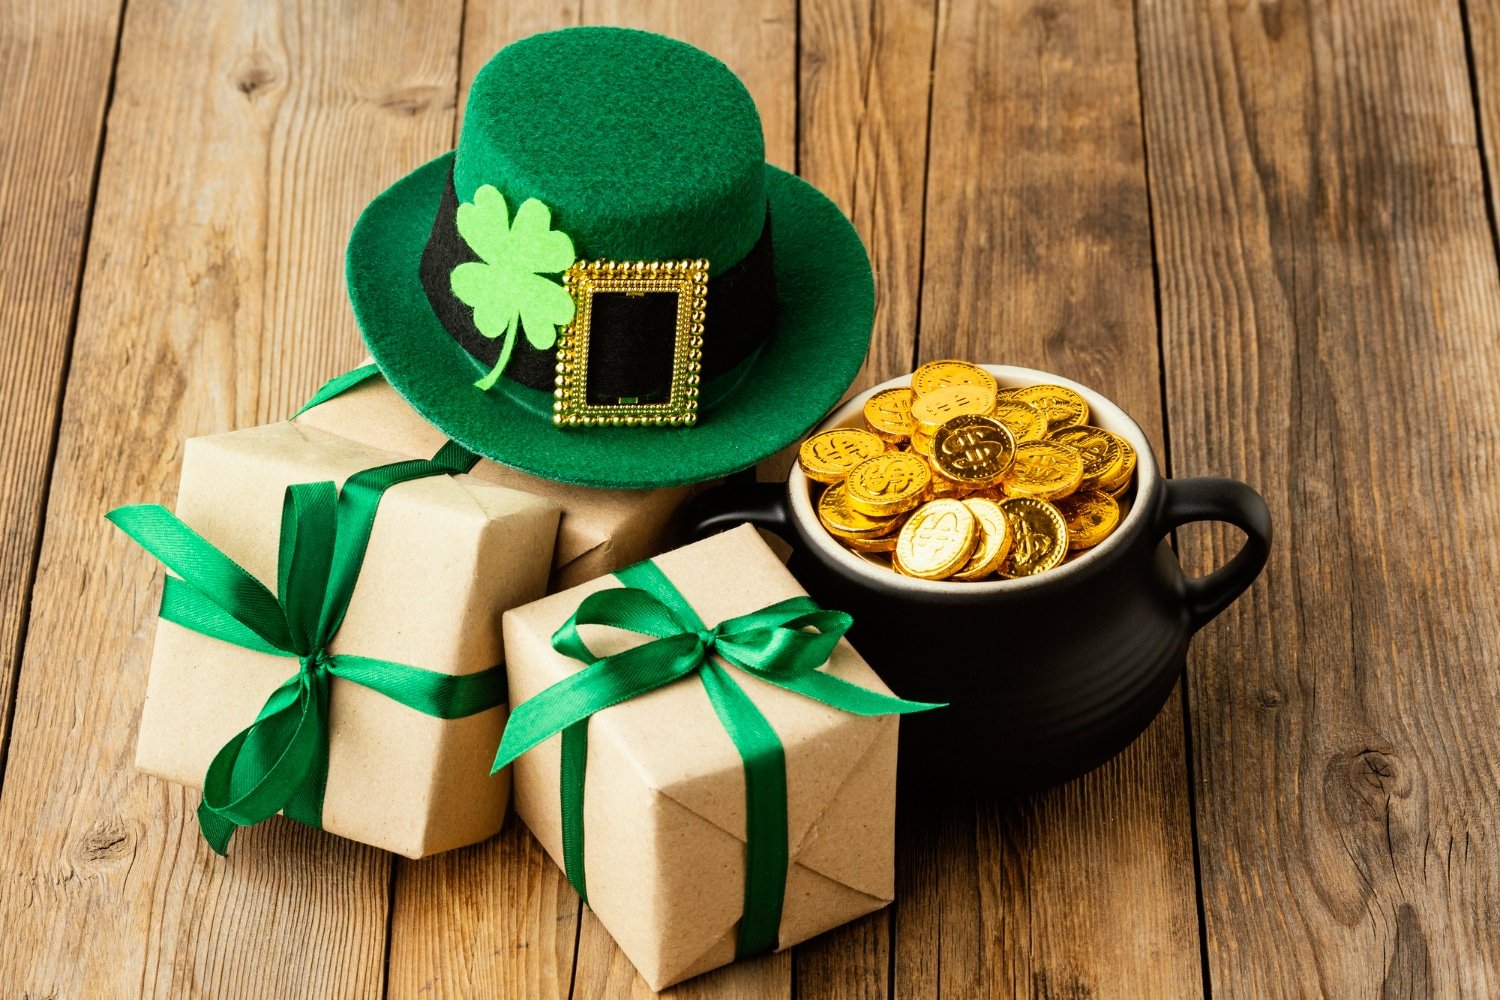 Find Unique Irish Gifts At Creative Irish Gifts’s Online Store